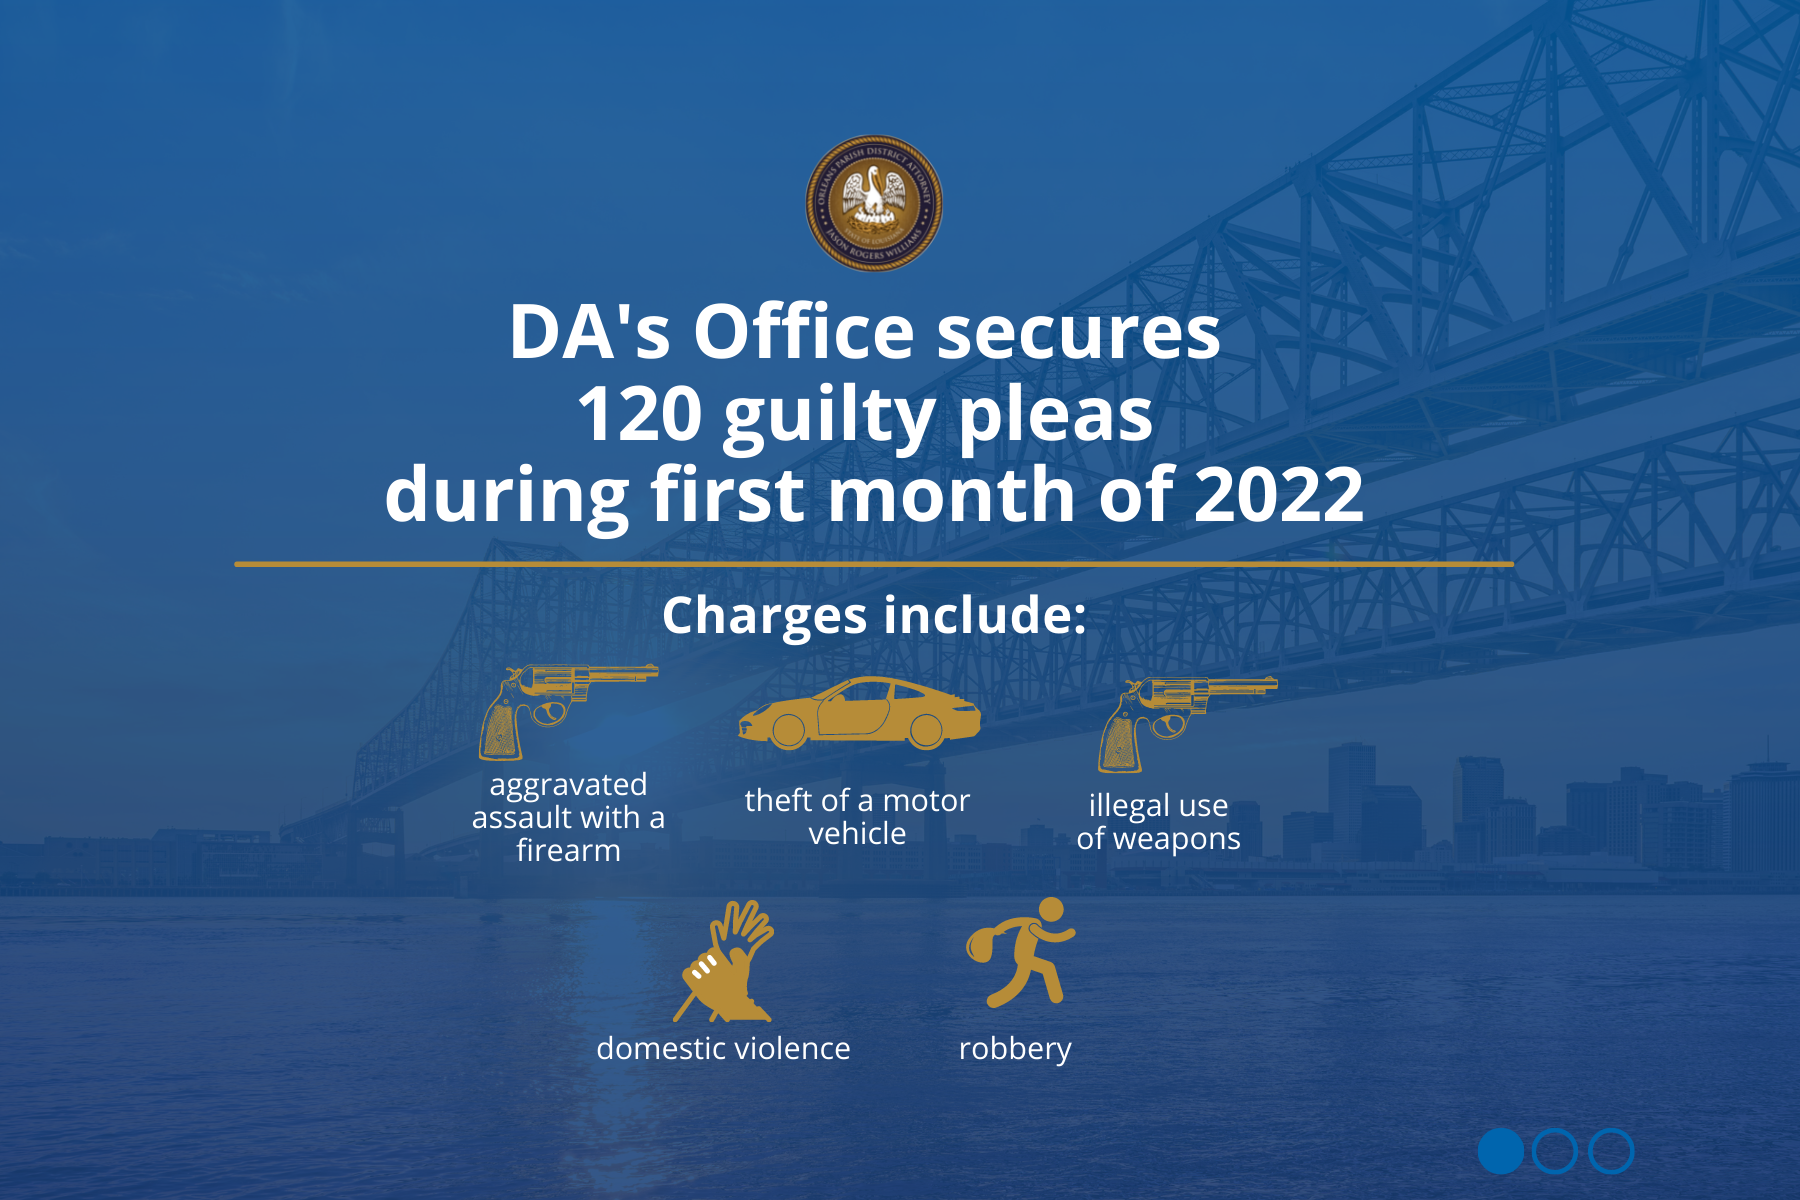 DA'S OFFICE SECURES 120 GUILTY PLEAS DURING FIRST MONTH OF 2022